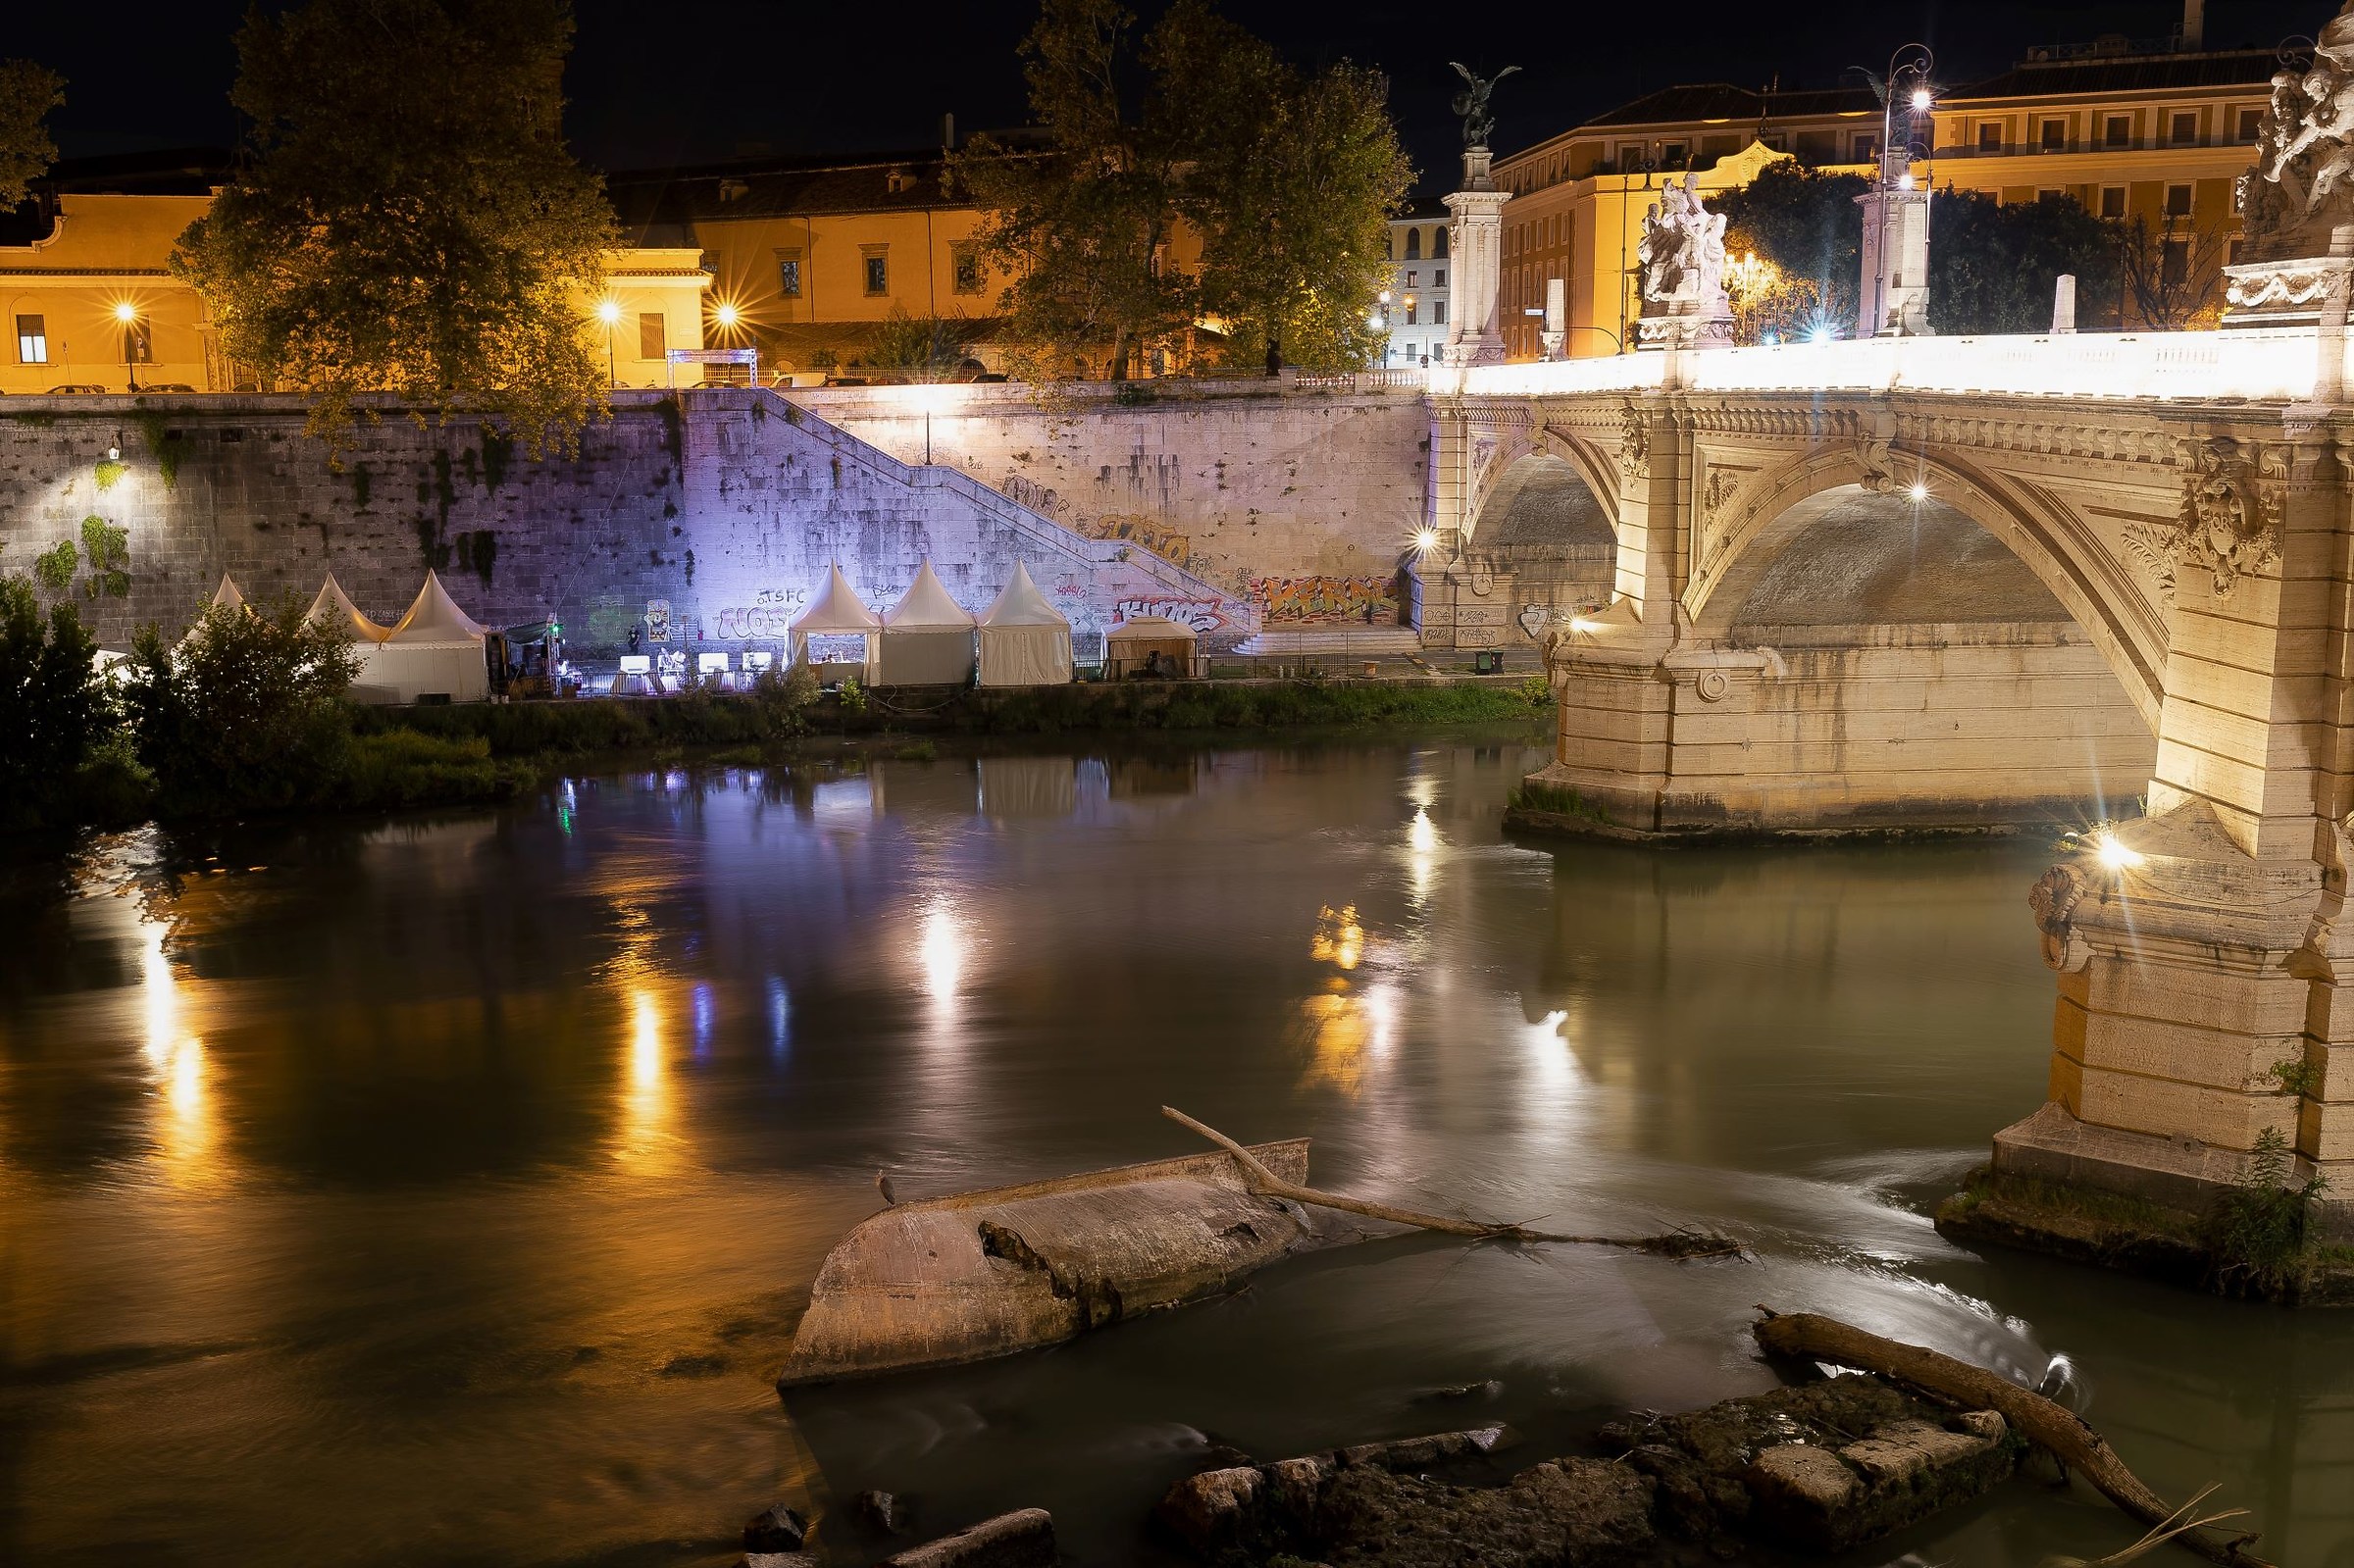 The silence of the Tiber...